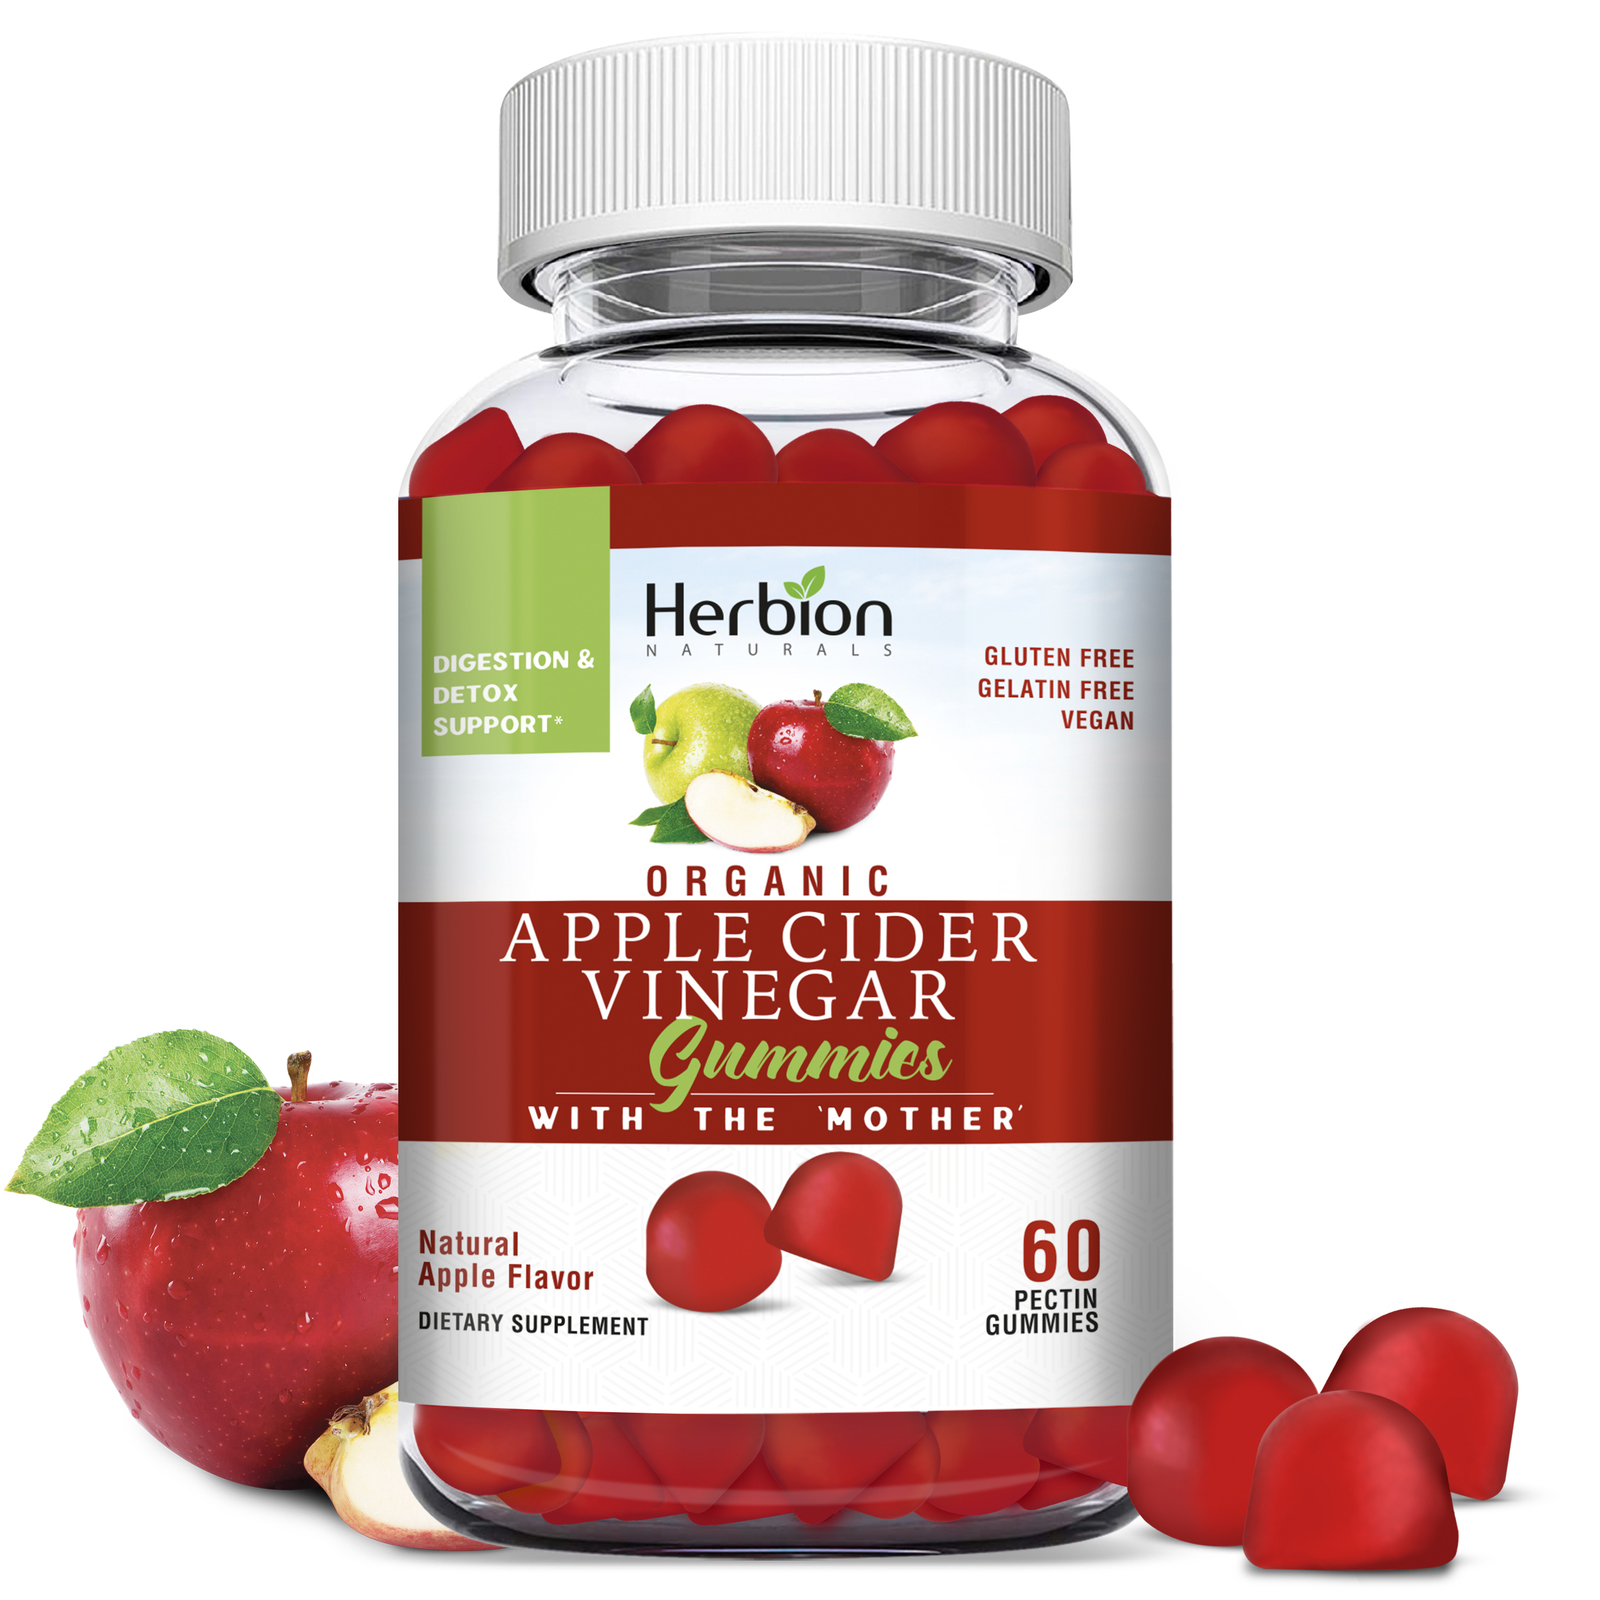 Herbion Naturals Organic Apple Cider Vinegar Gummies with the “Mother”, 60 Count